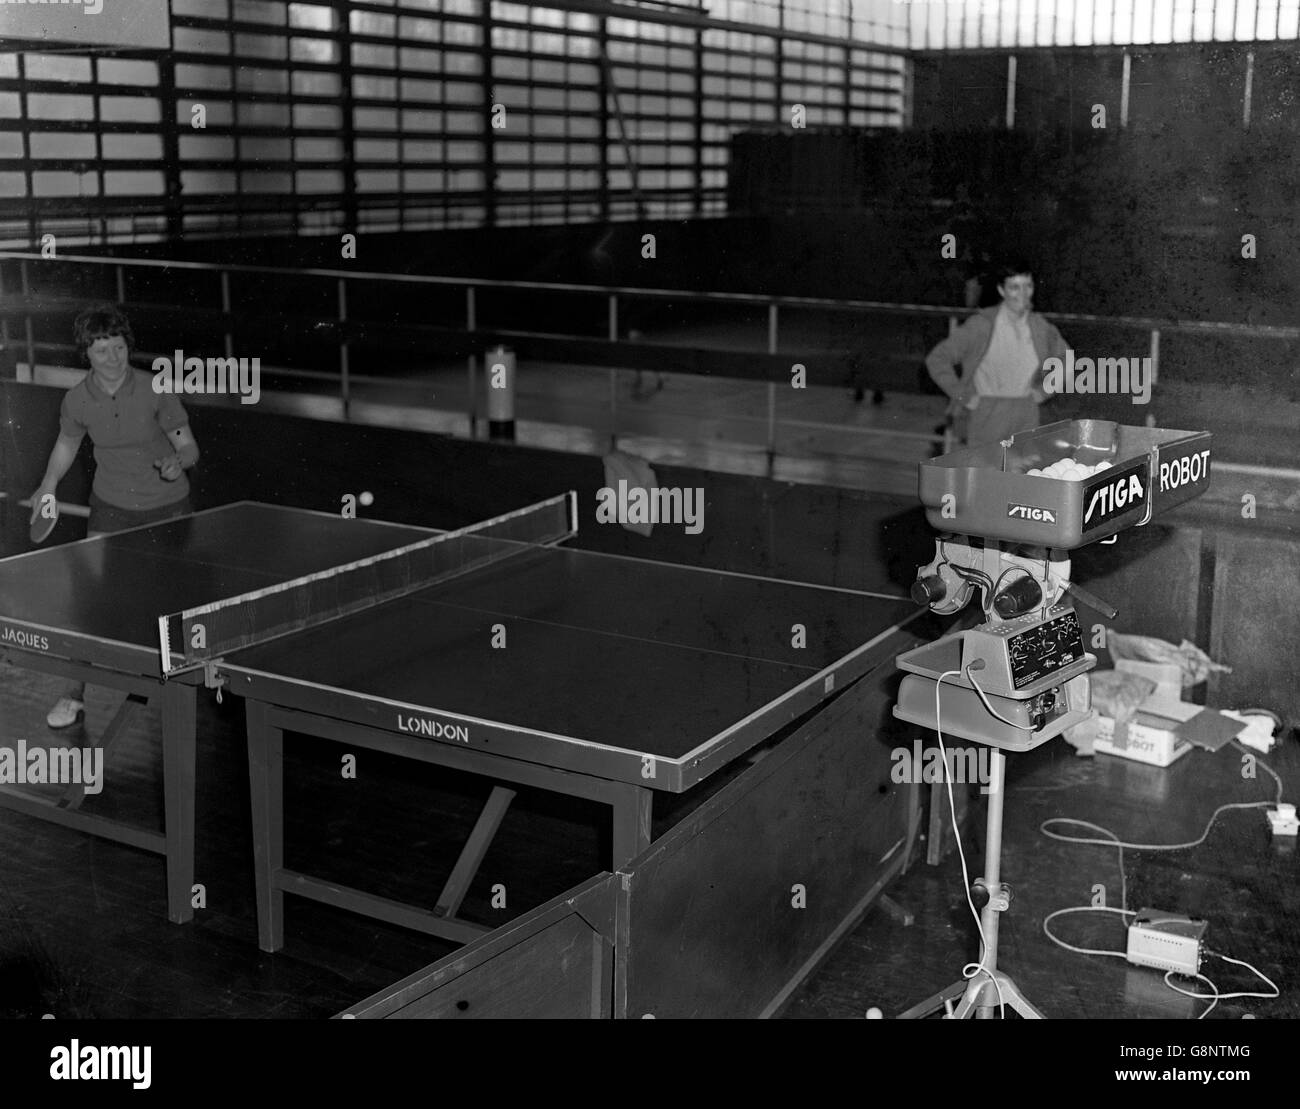 A robot trainer is being used as part of the practice for the England table tennis team preparing for the European Championships at Wembley between 13th and 20th April, 1966. Stock Photo